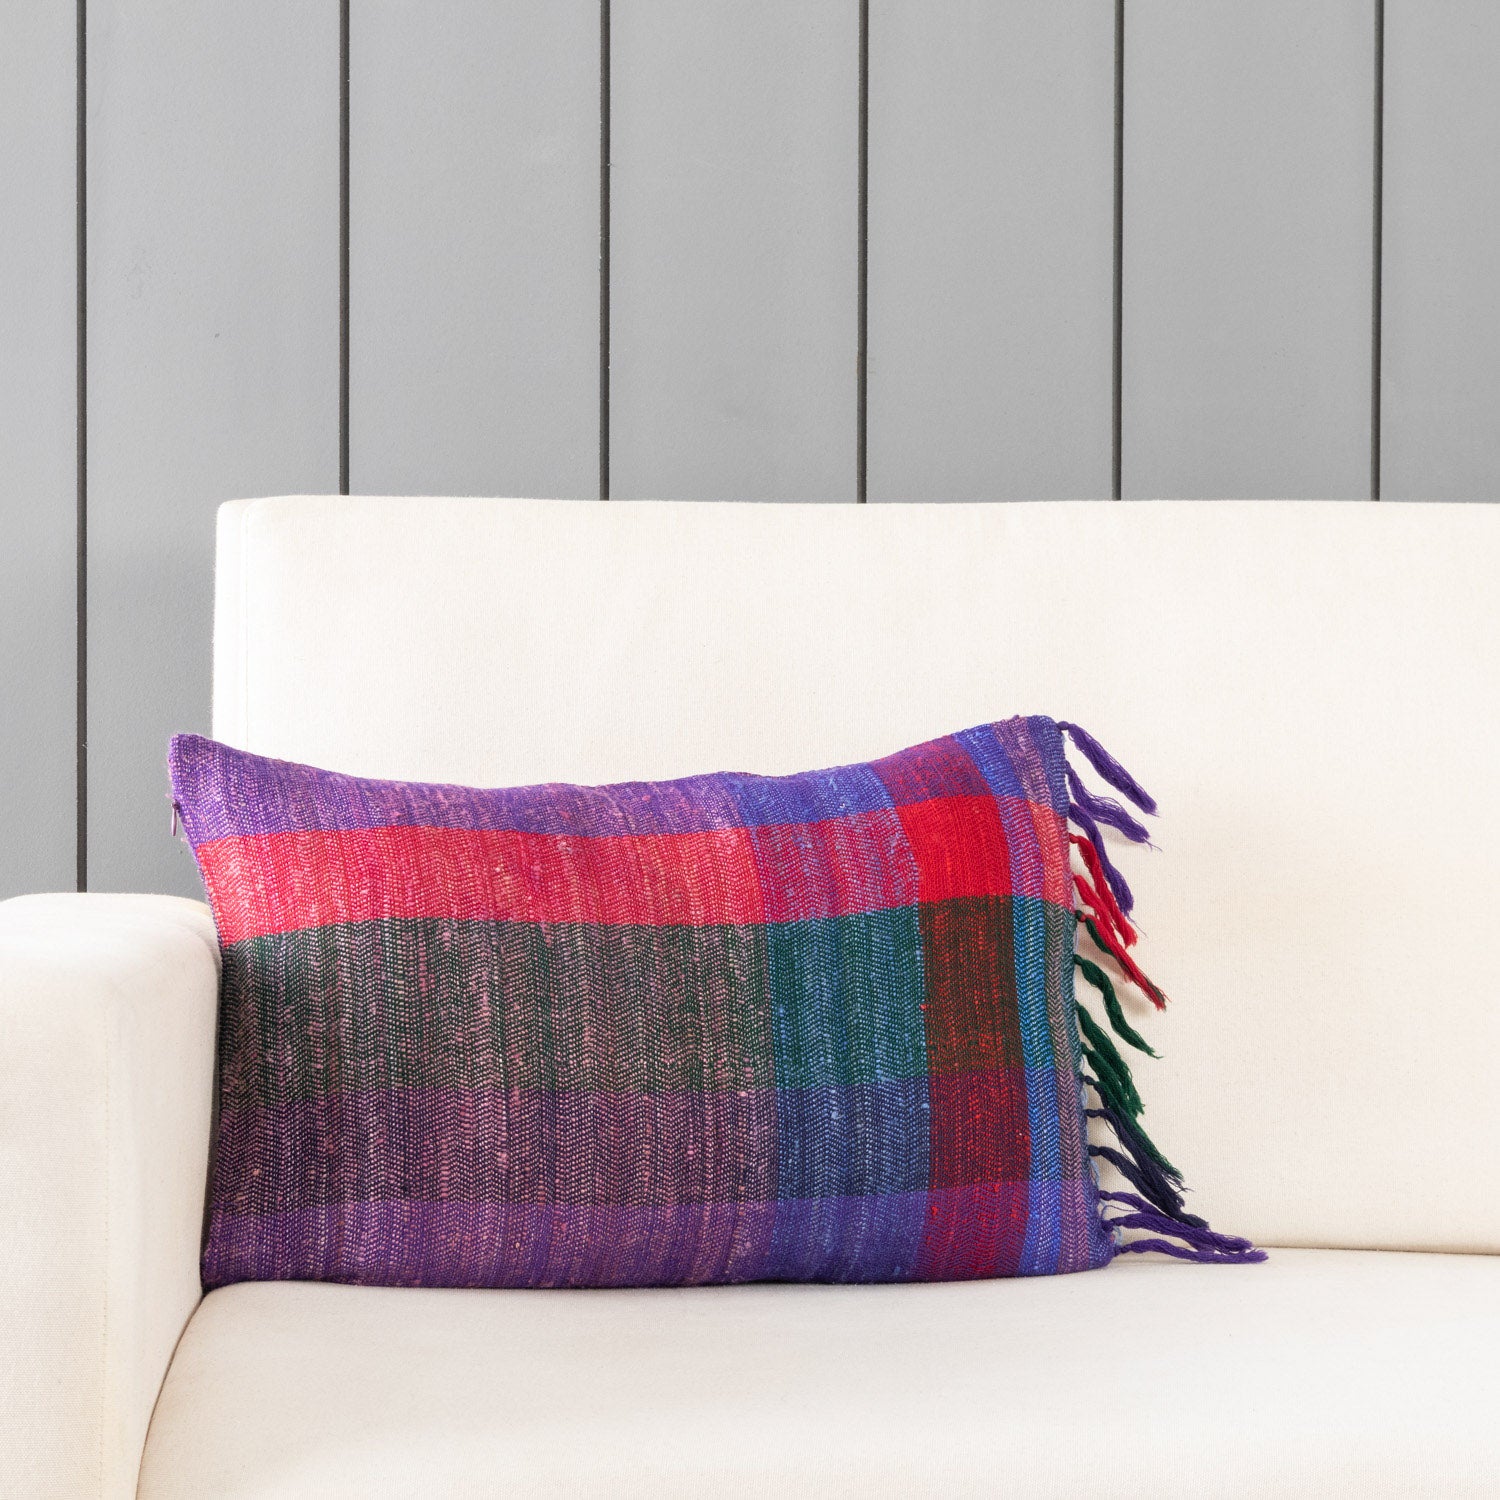 Handwoven Upcycled Multi-colored Wool & Oak Silk Cushion Cover - 12x18